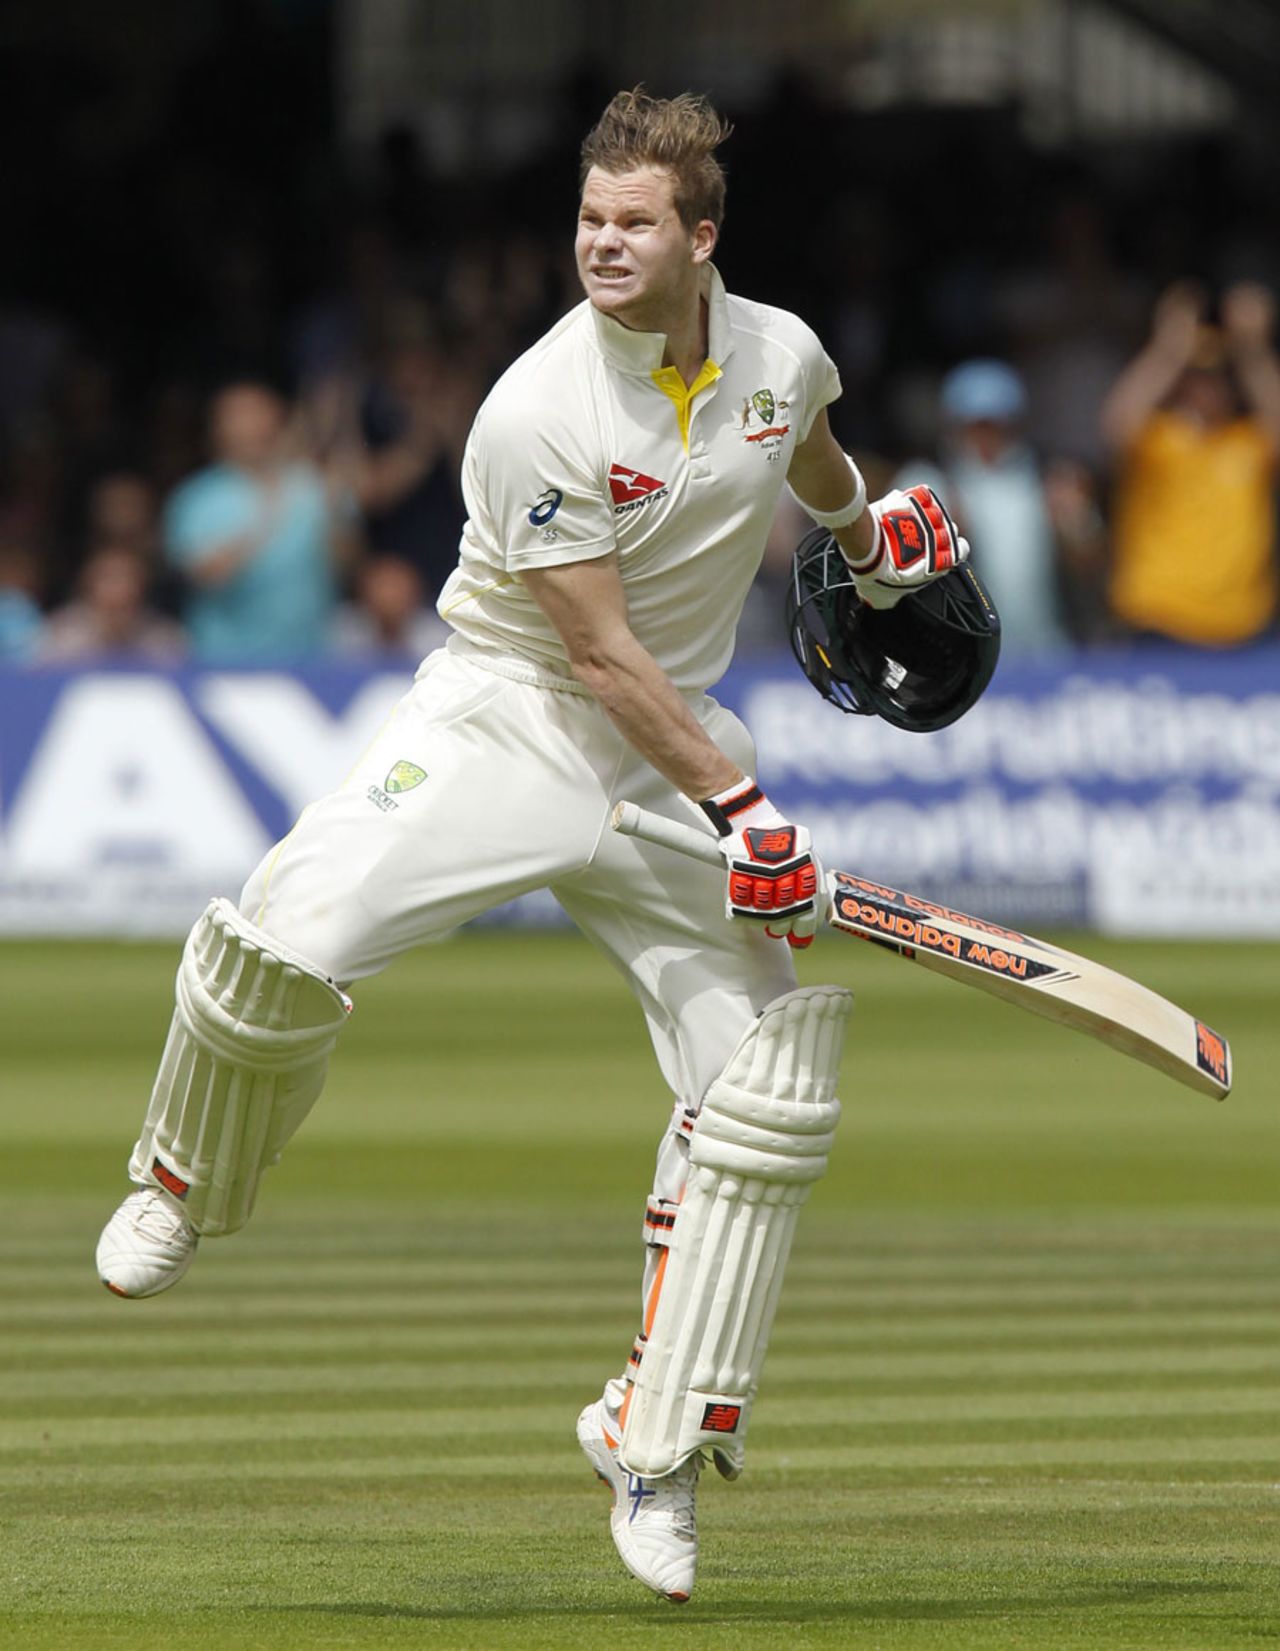 Steven Smith leaps on reaching his double-century, England v Australia, 2nd Investec Ashes Test, Lord's, 2nd day, July 17, 2015